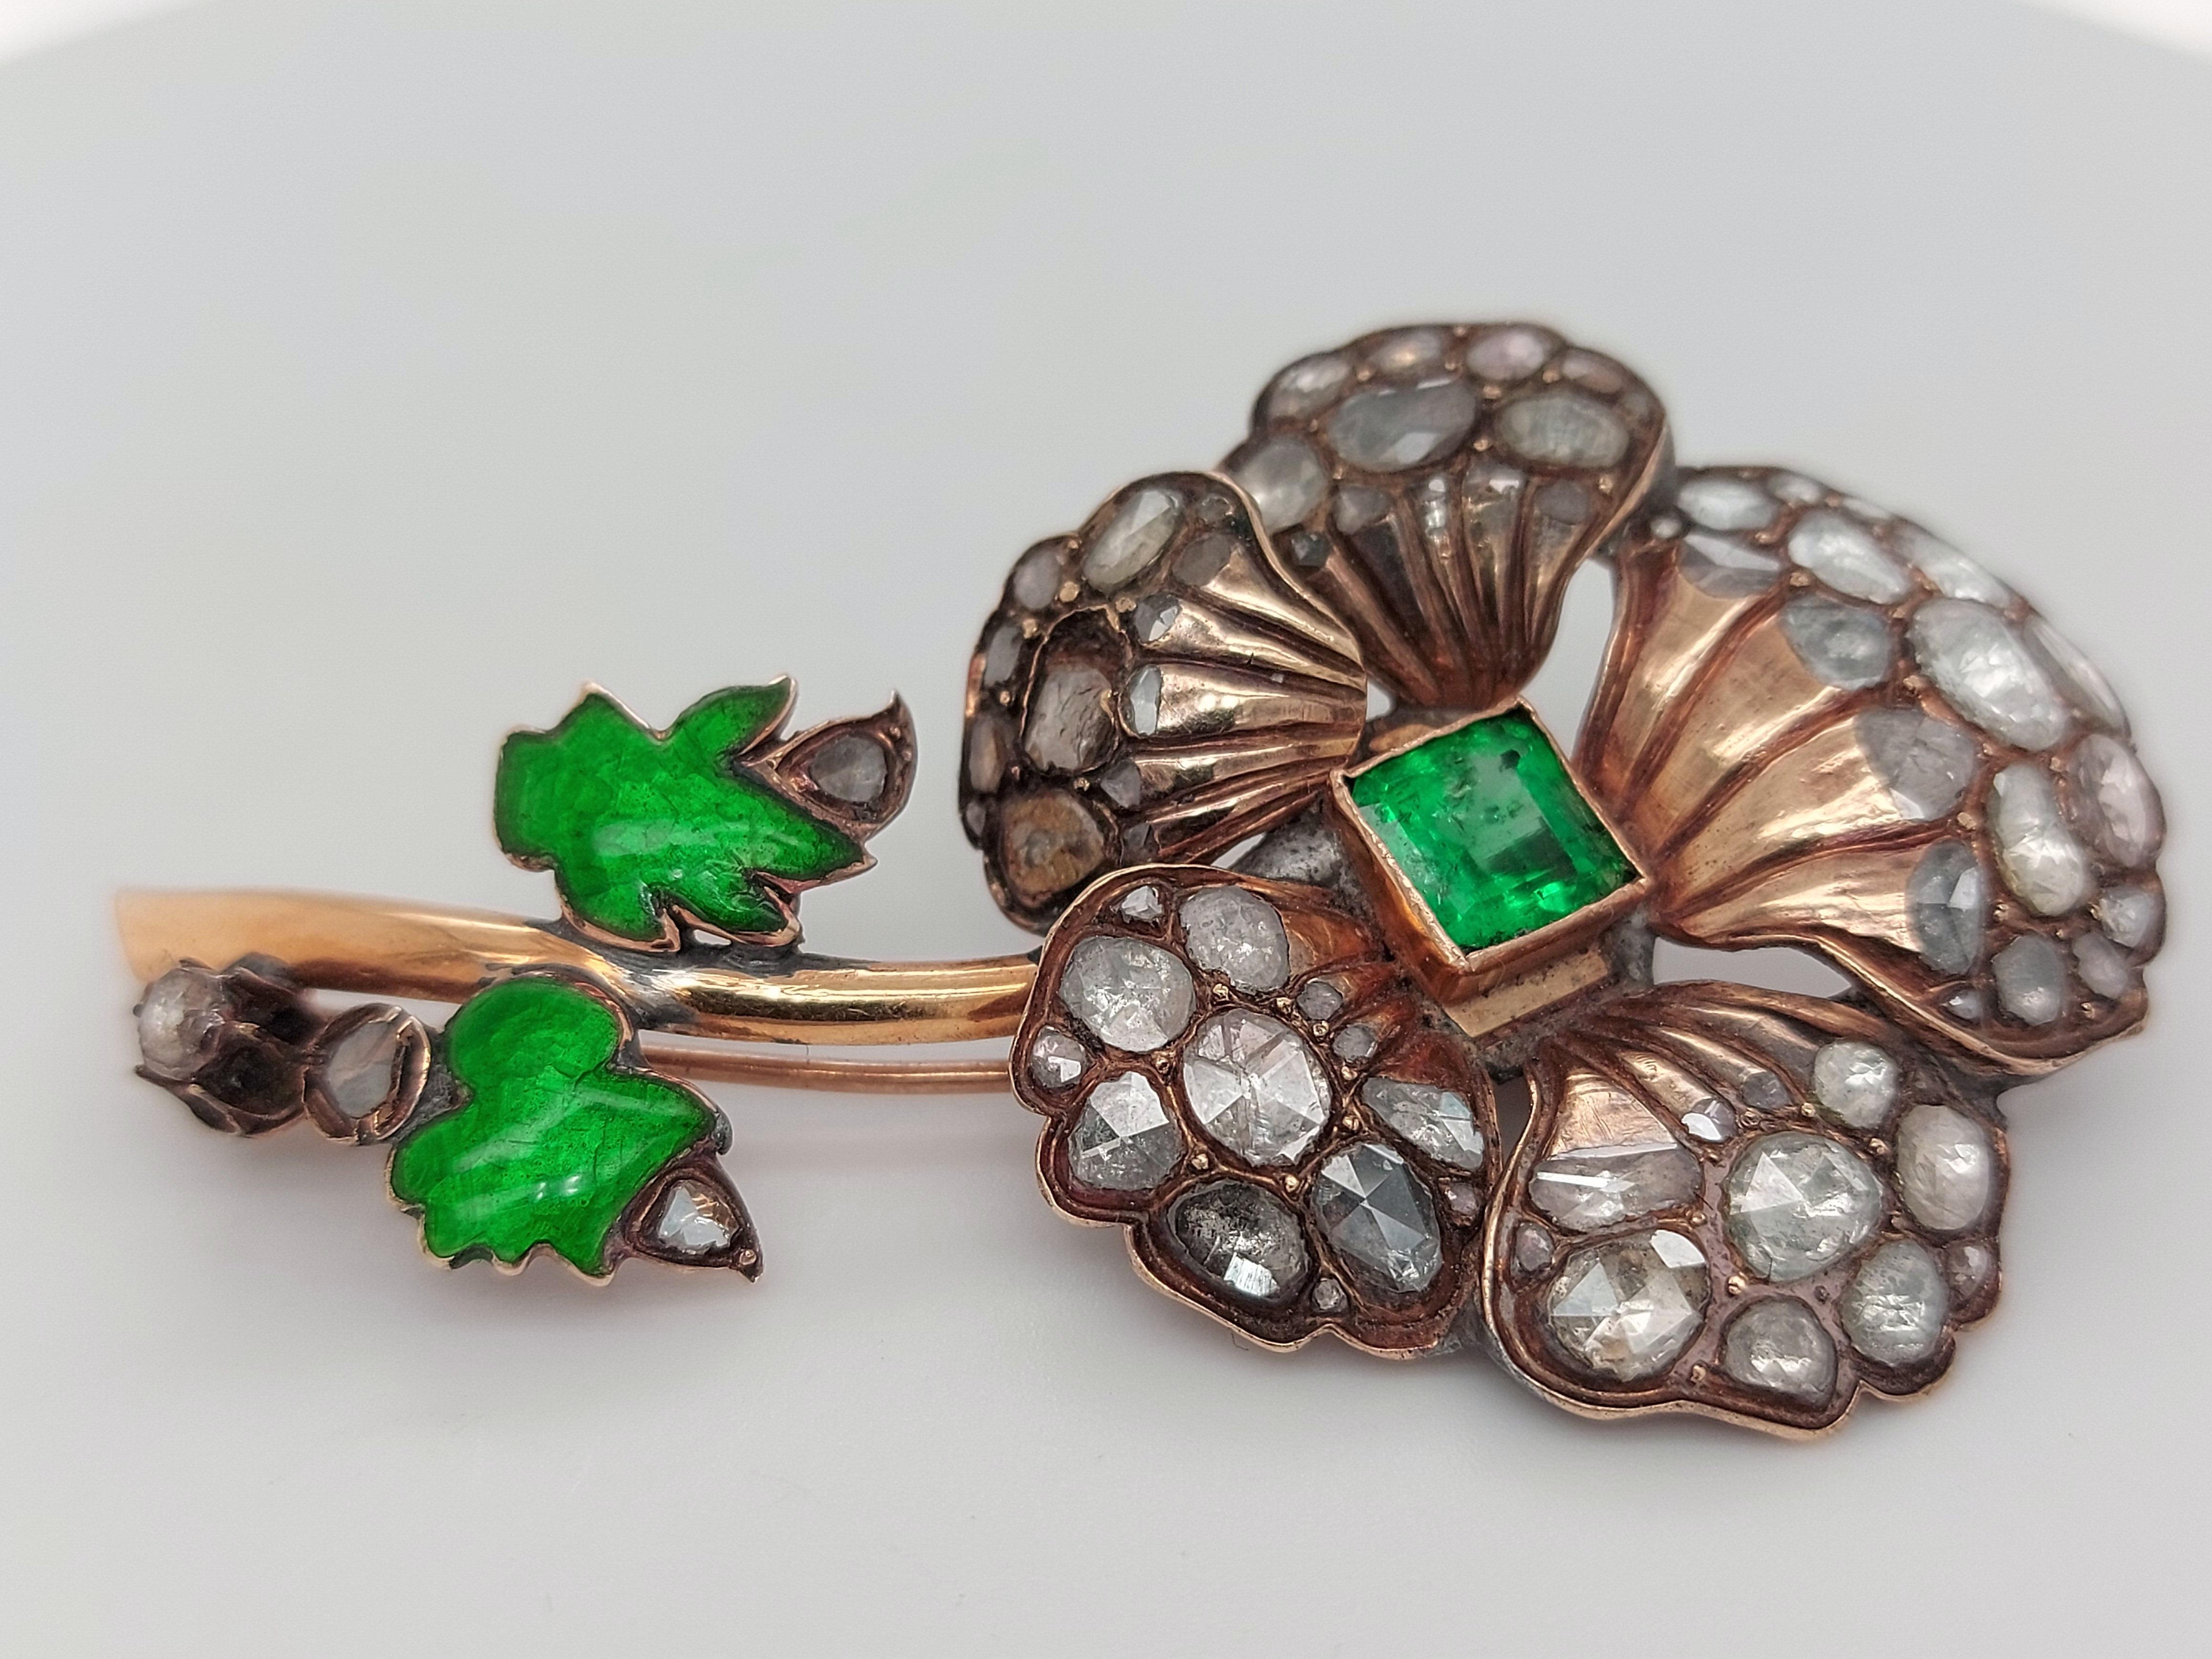 Silver and 14kt Gold Flower Brooch, Rose Cut Diamonds, Colombia Emerald, Enamel For Sale 3